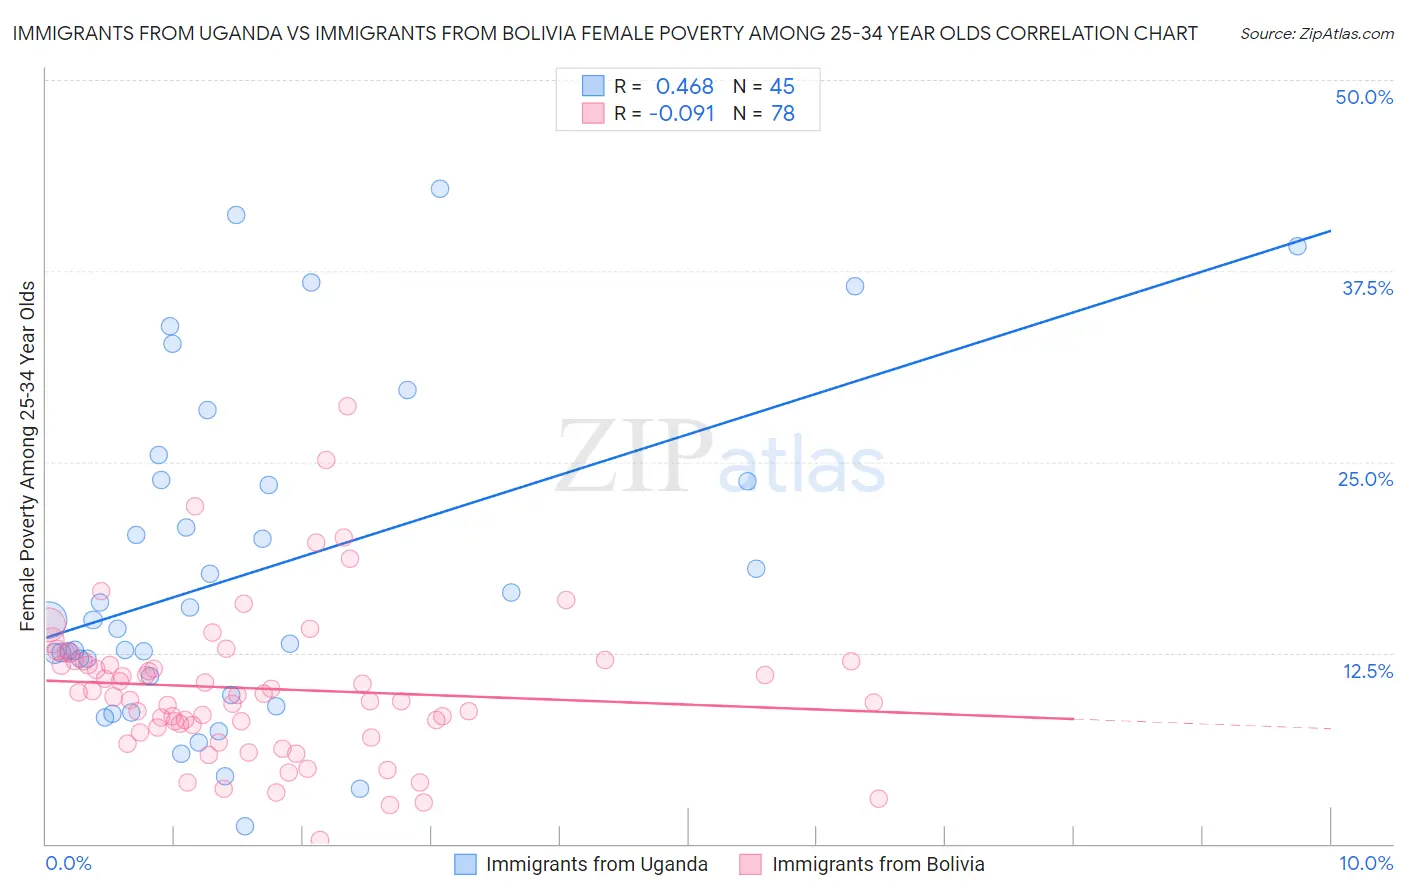 Immigrants from Uganda vs Immigrants from Bolivia Female Poverty Among 25-34 Year Olds